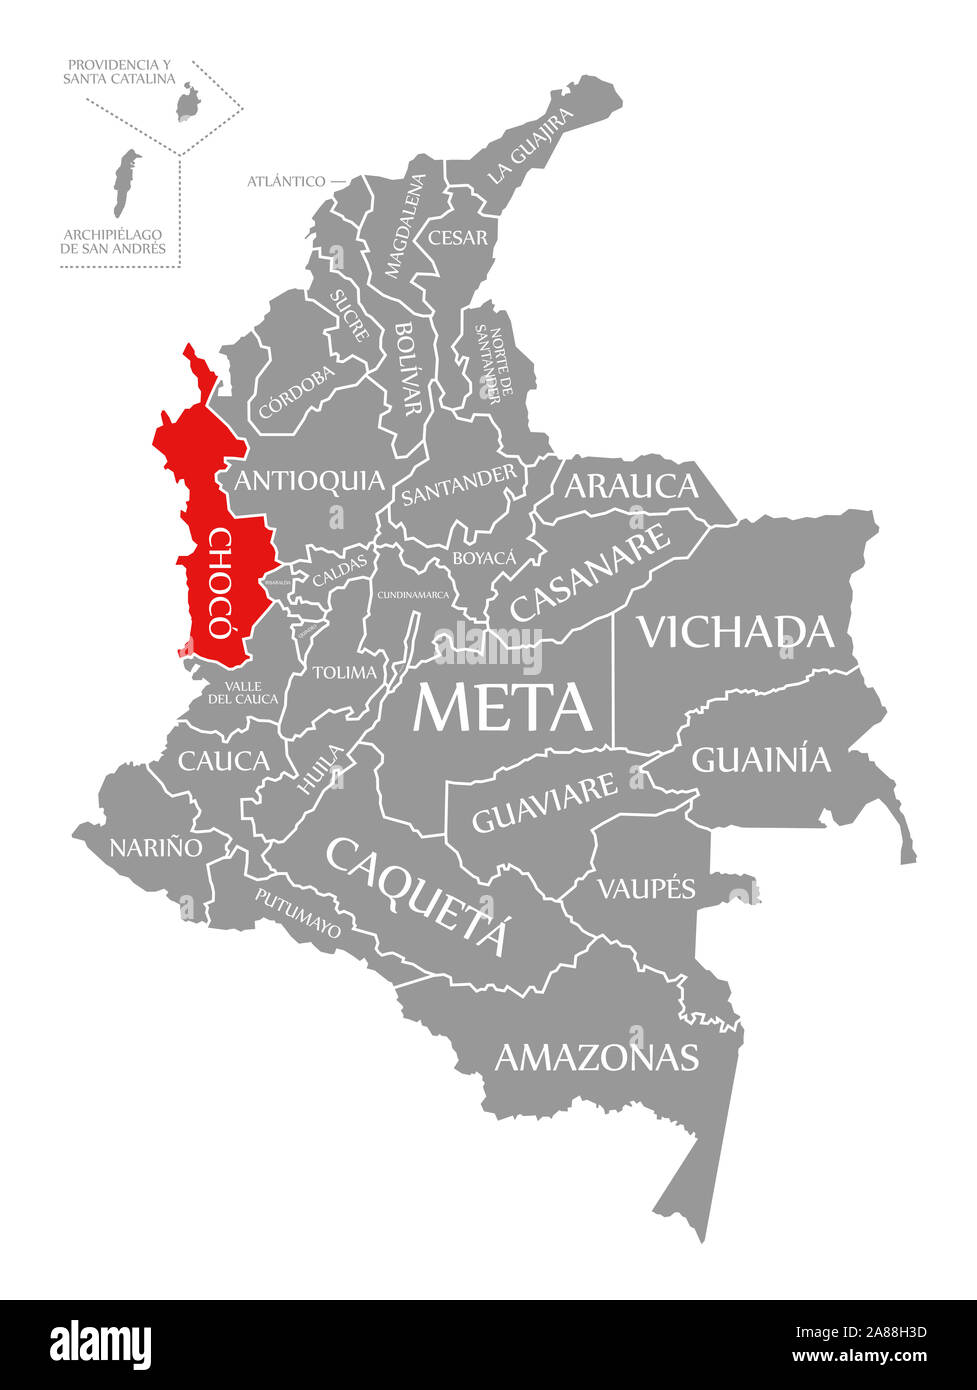 Choco red highlighted in map of Colombia Stock Photo